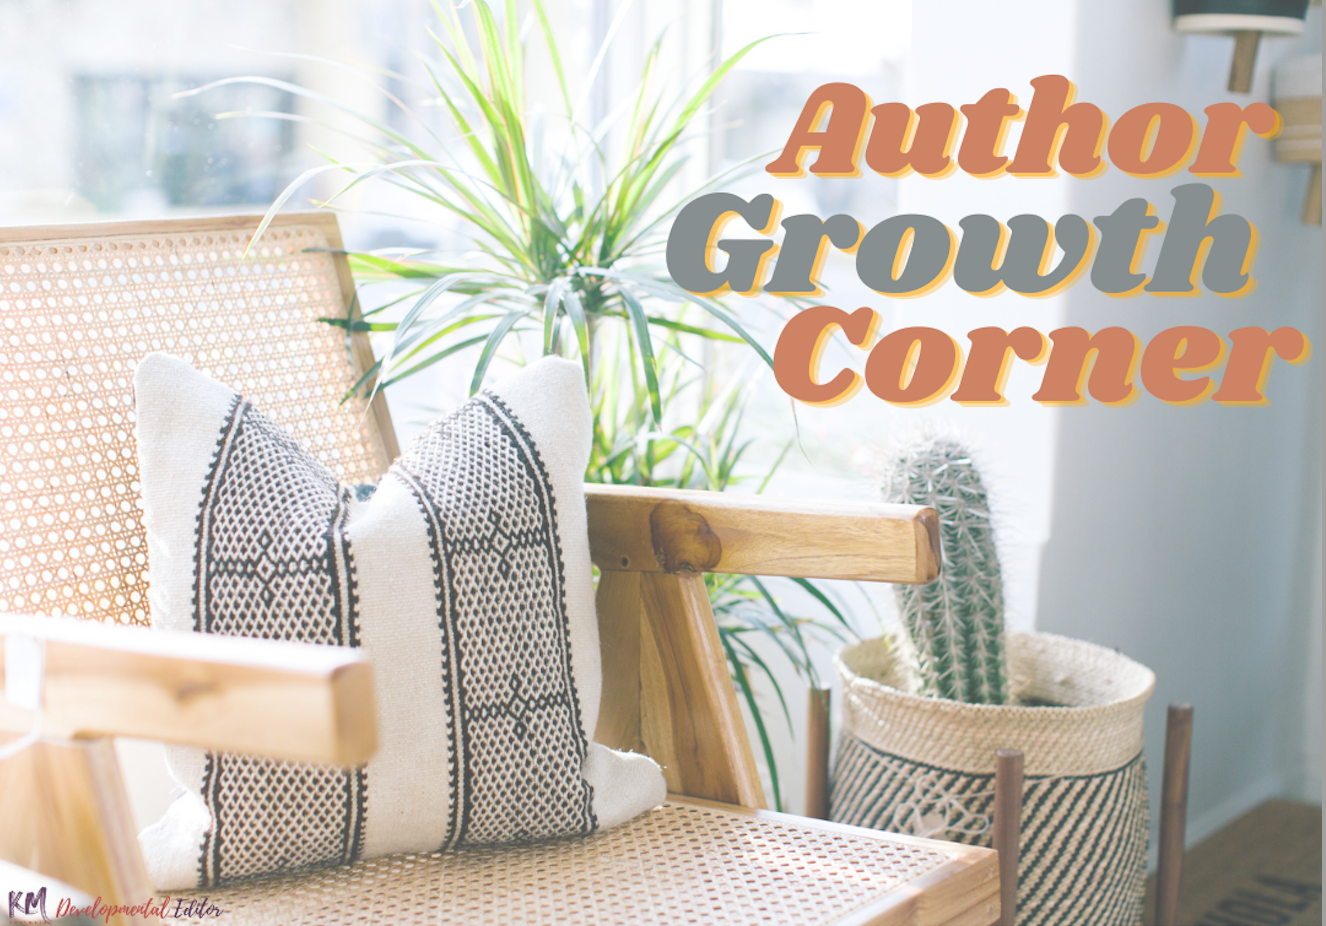 Image of chair and plant with text "Author Growth Corner" 